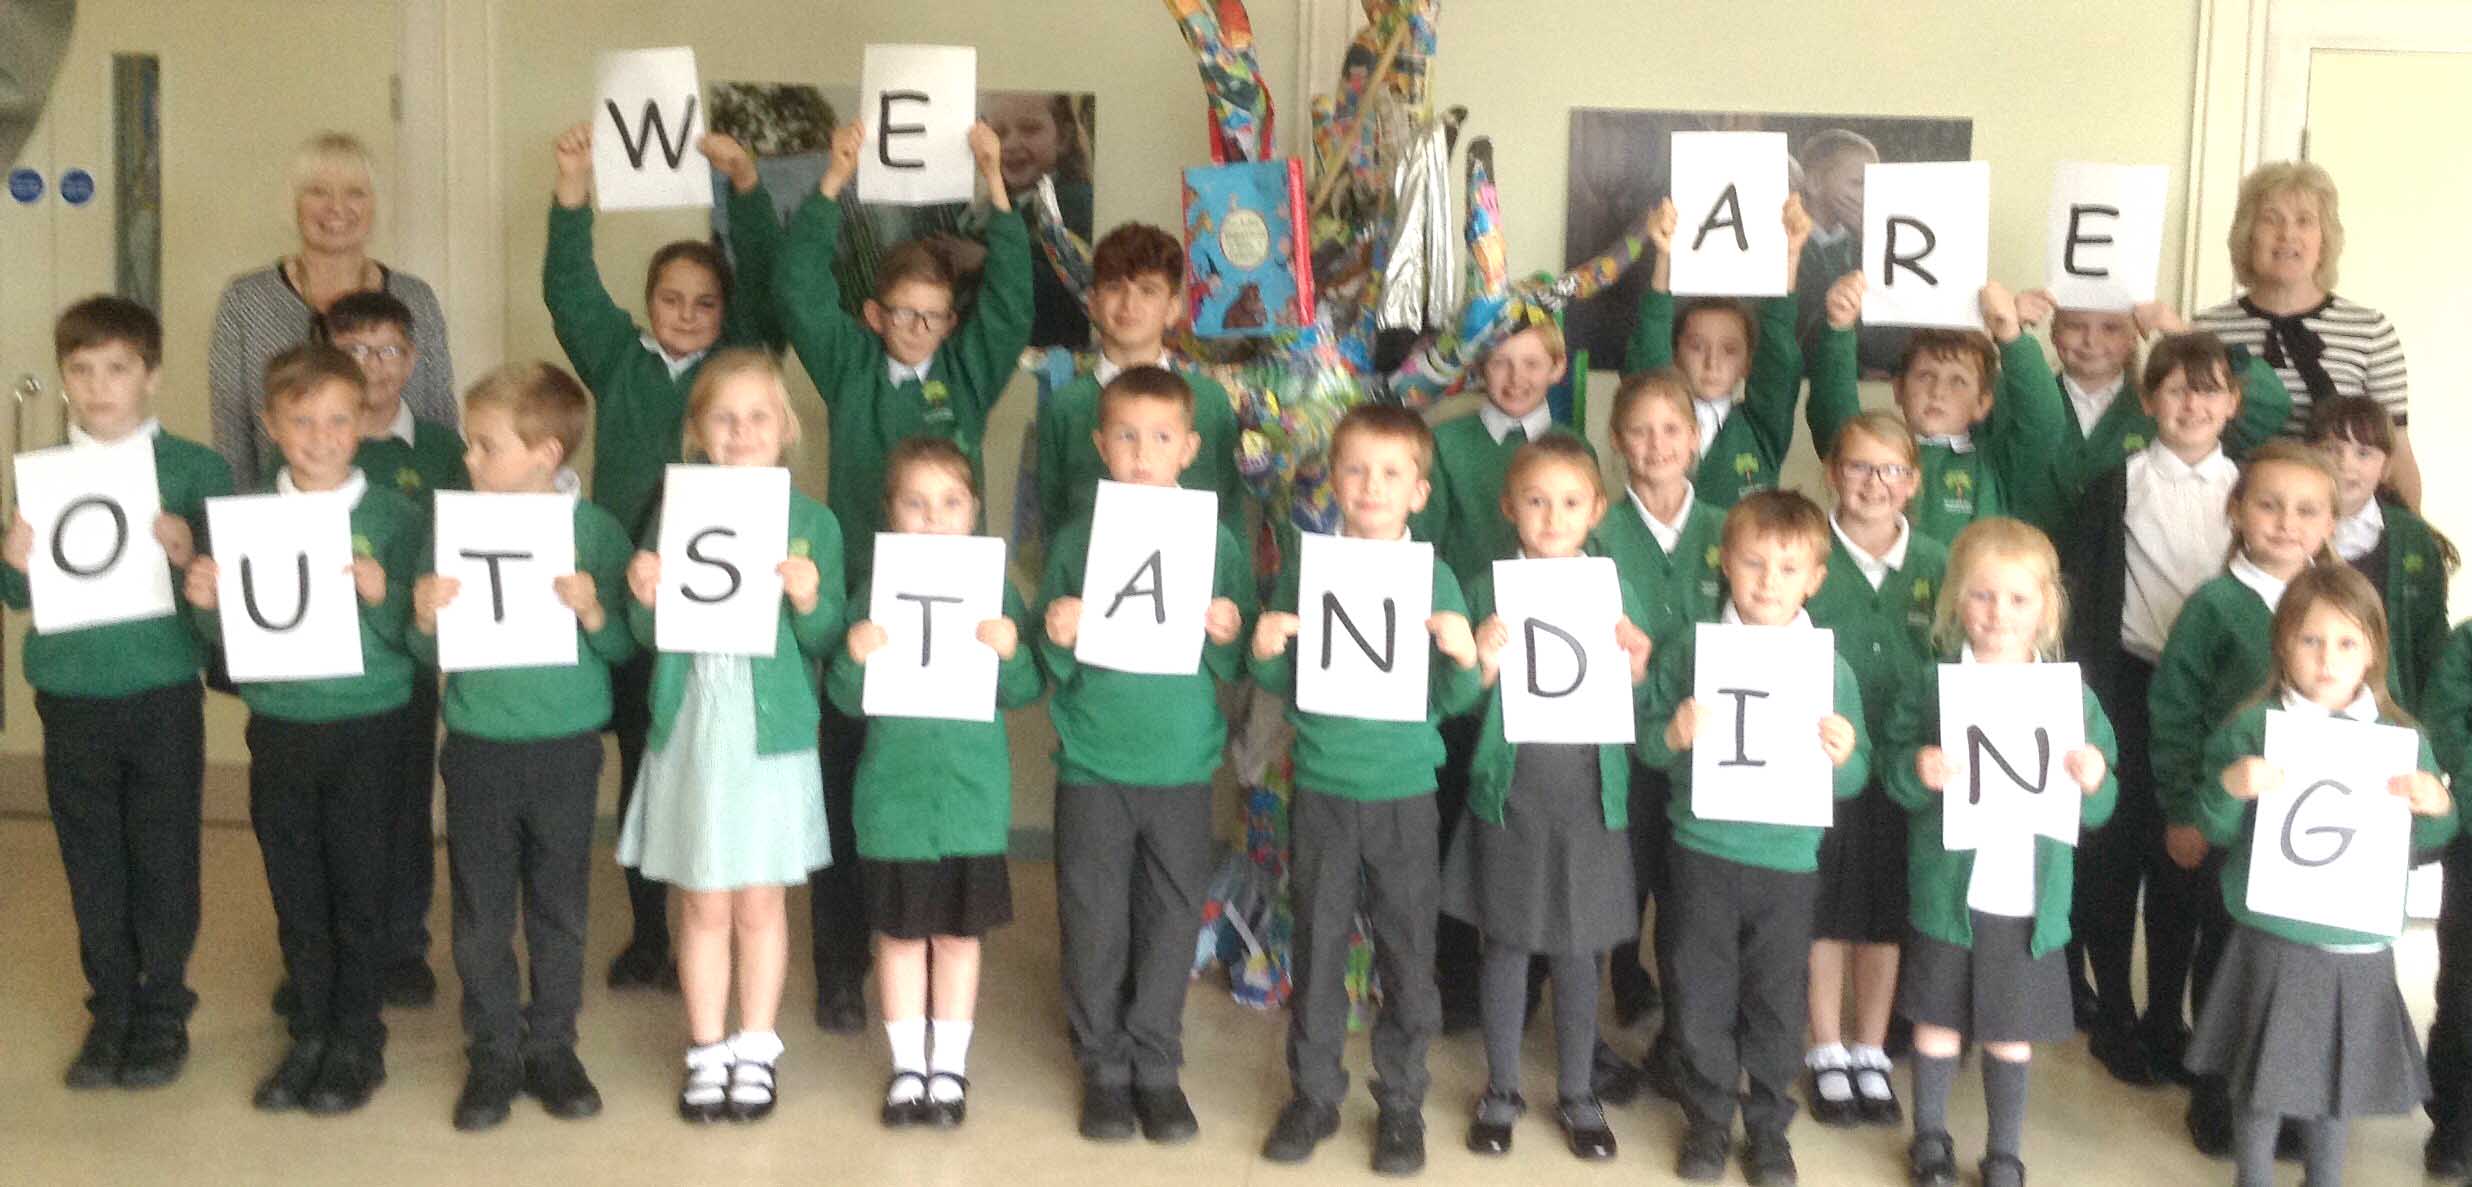 Sugar Hill Primary School Gain “Outstanding” Ofsted